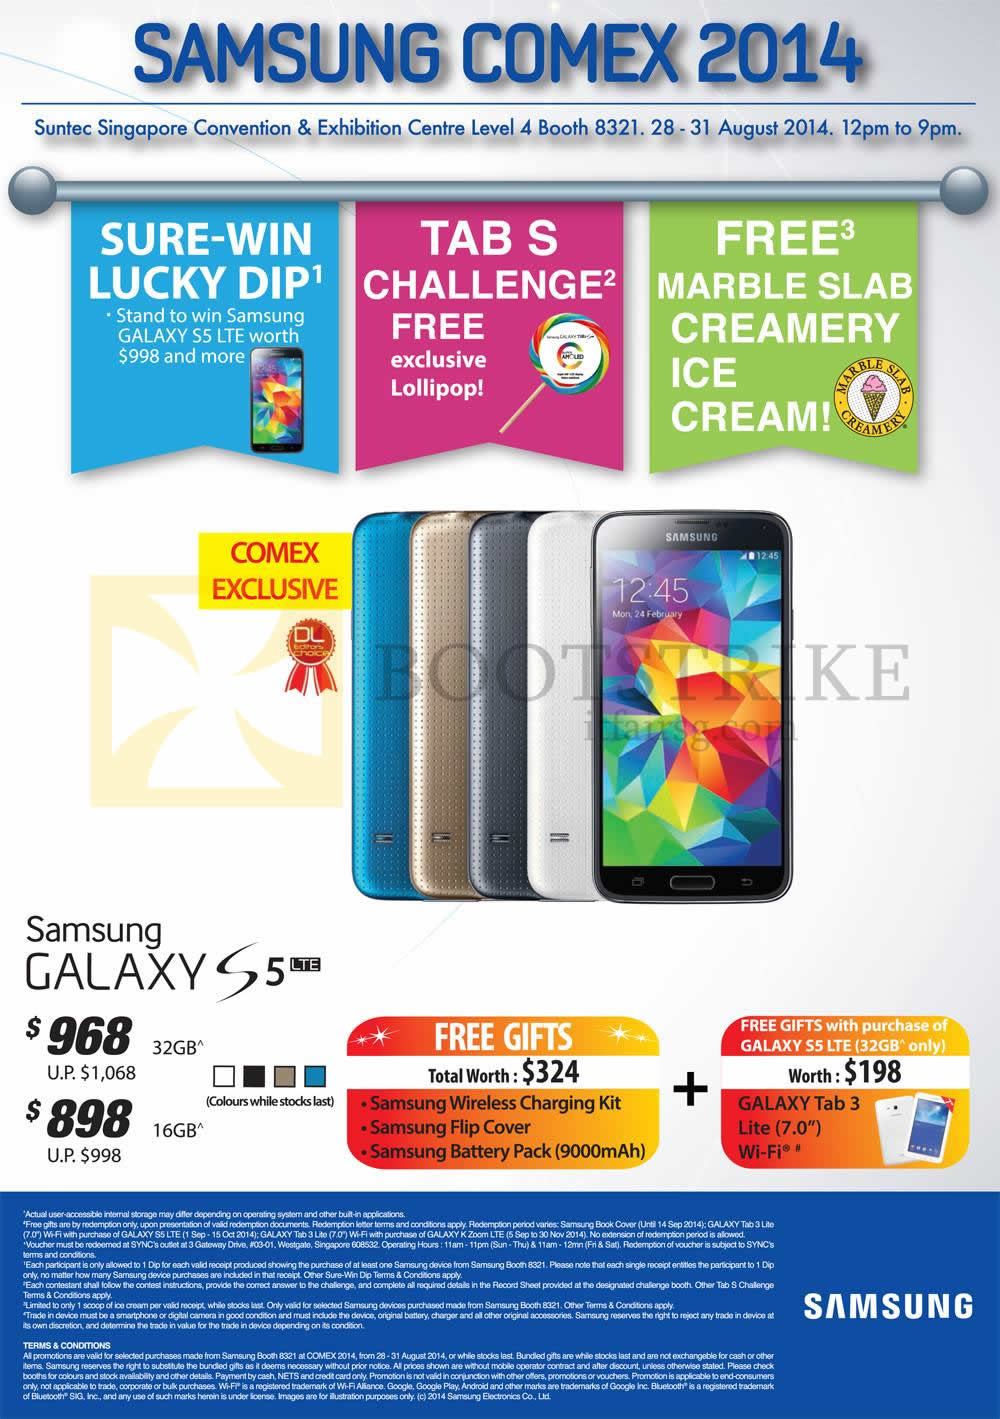 COMEX 2014 price list image brochure of Samsung Sure-Win Lucky Dip, Tab S Challenger, Free Ice Cream, Galaxy S5